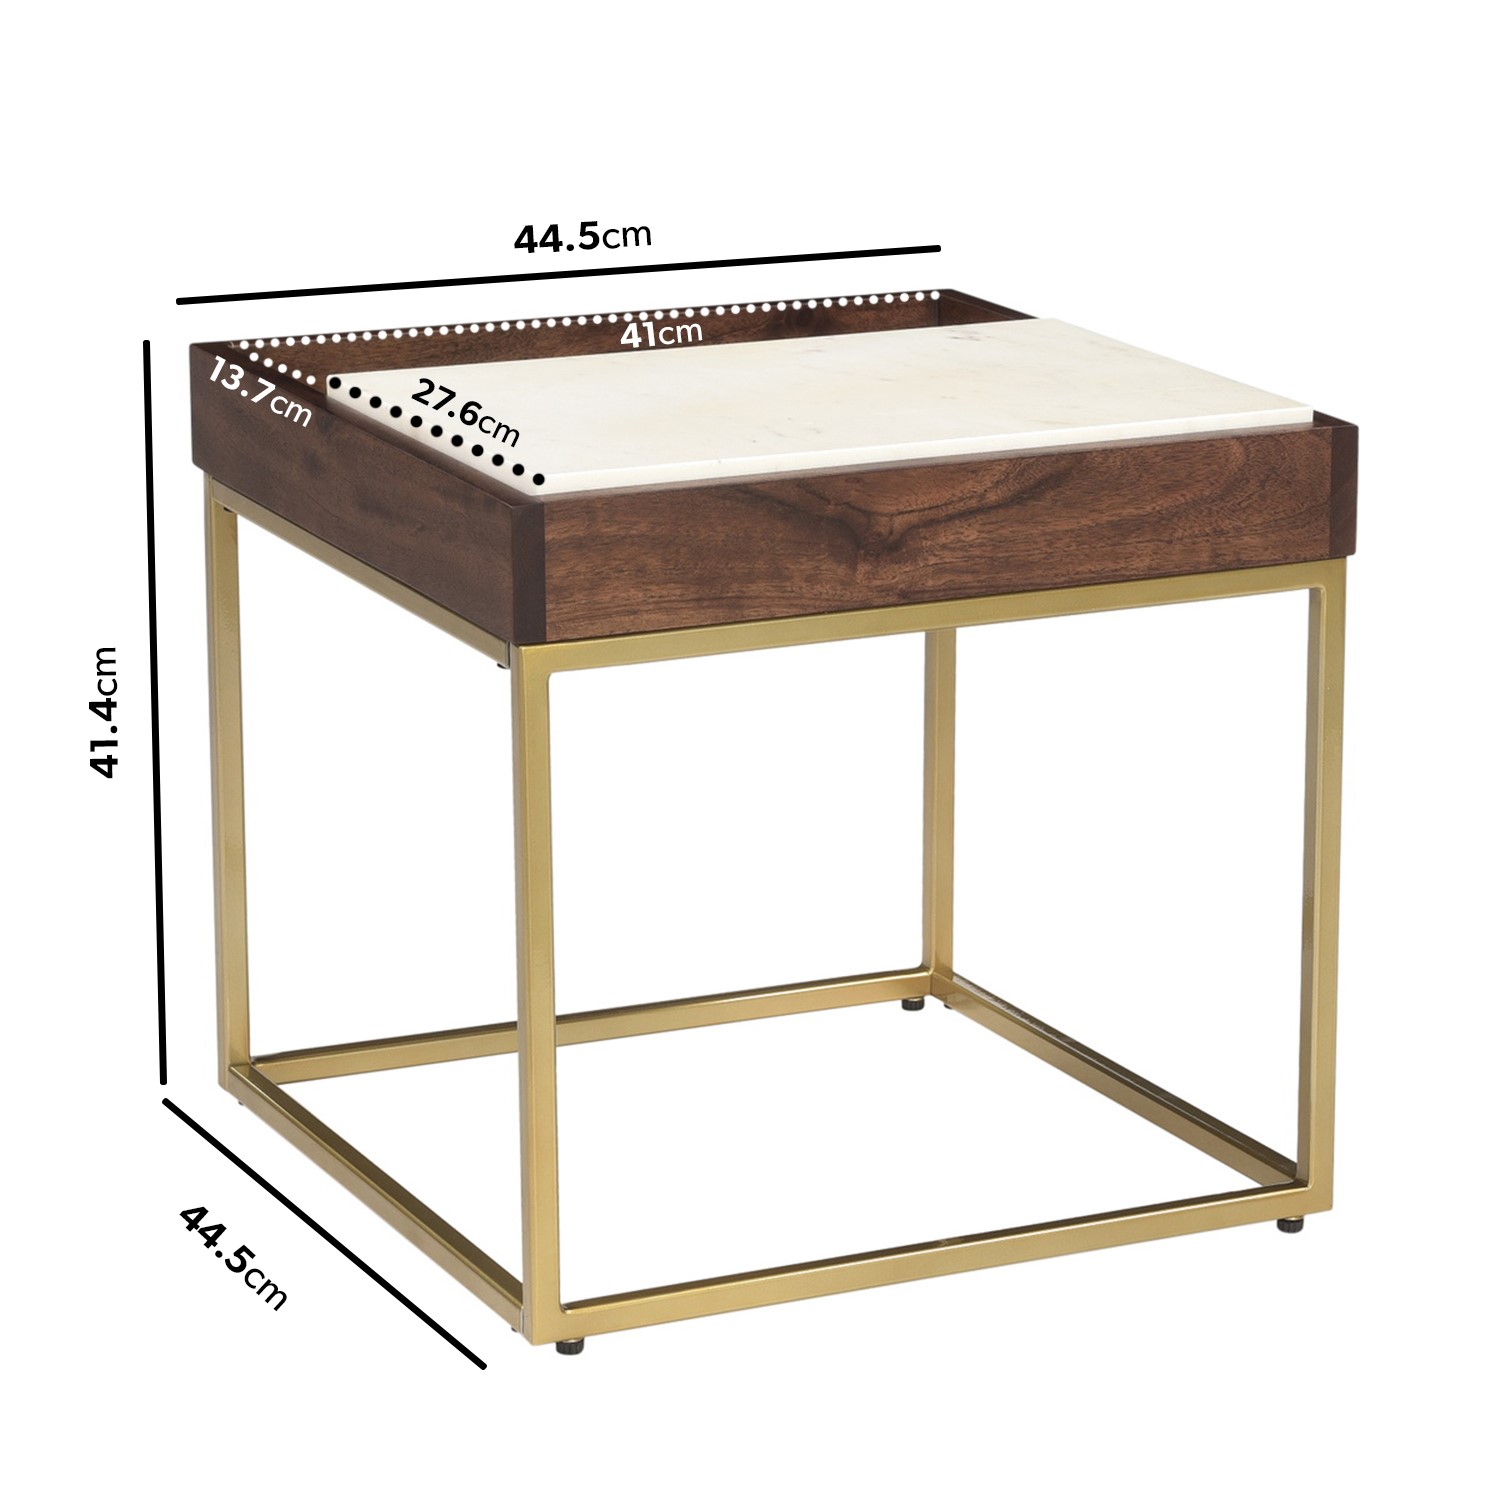 Read more about Square solid wood and marble side table with tray